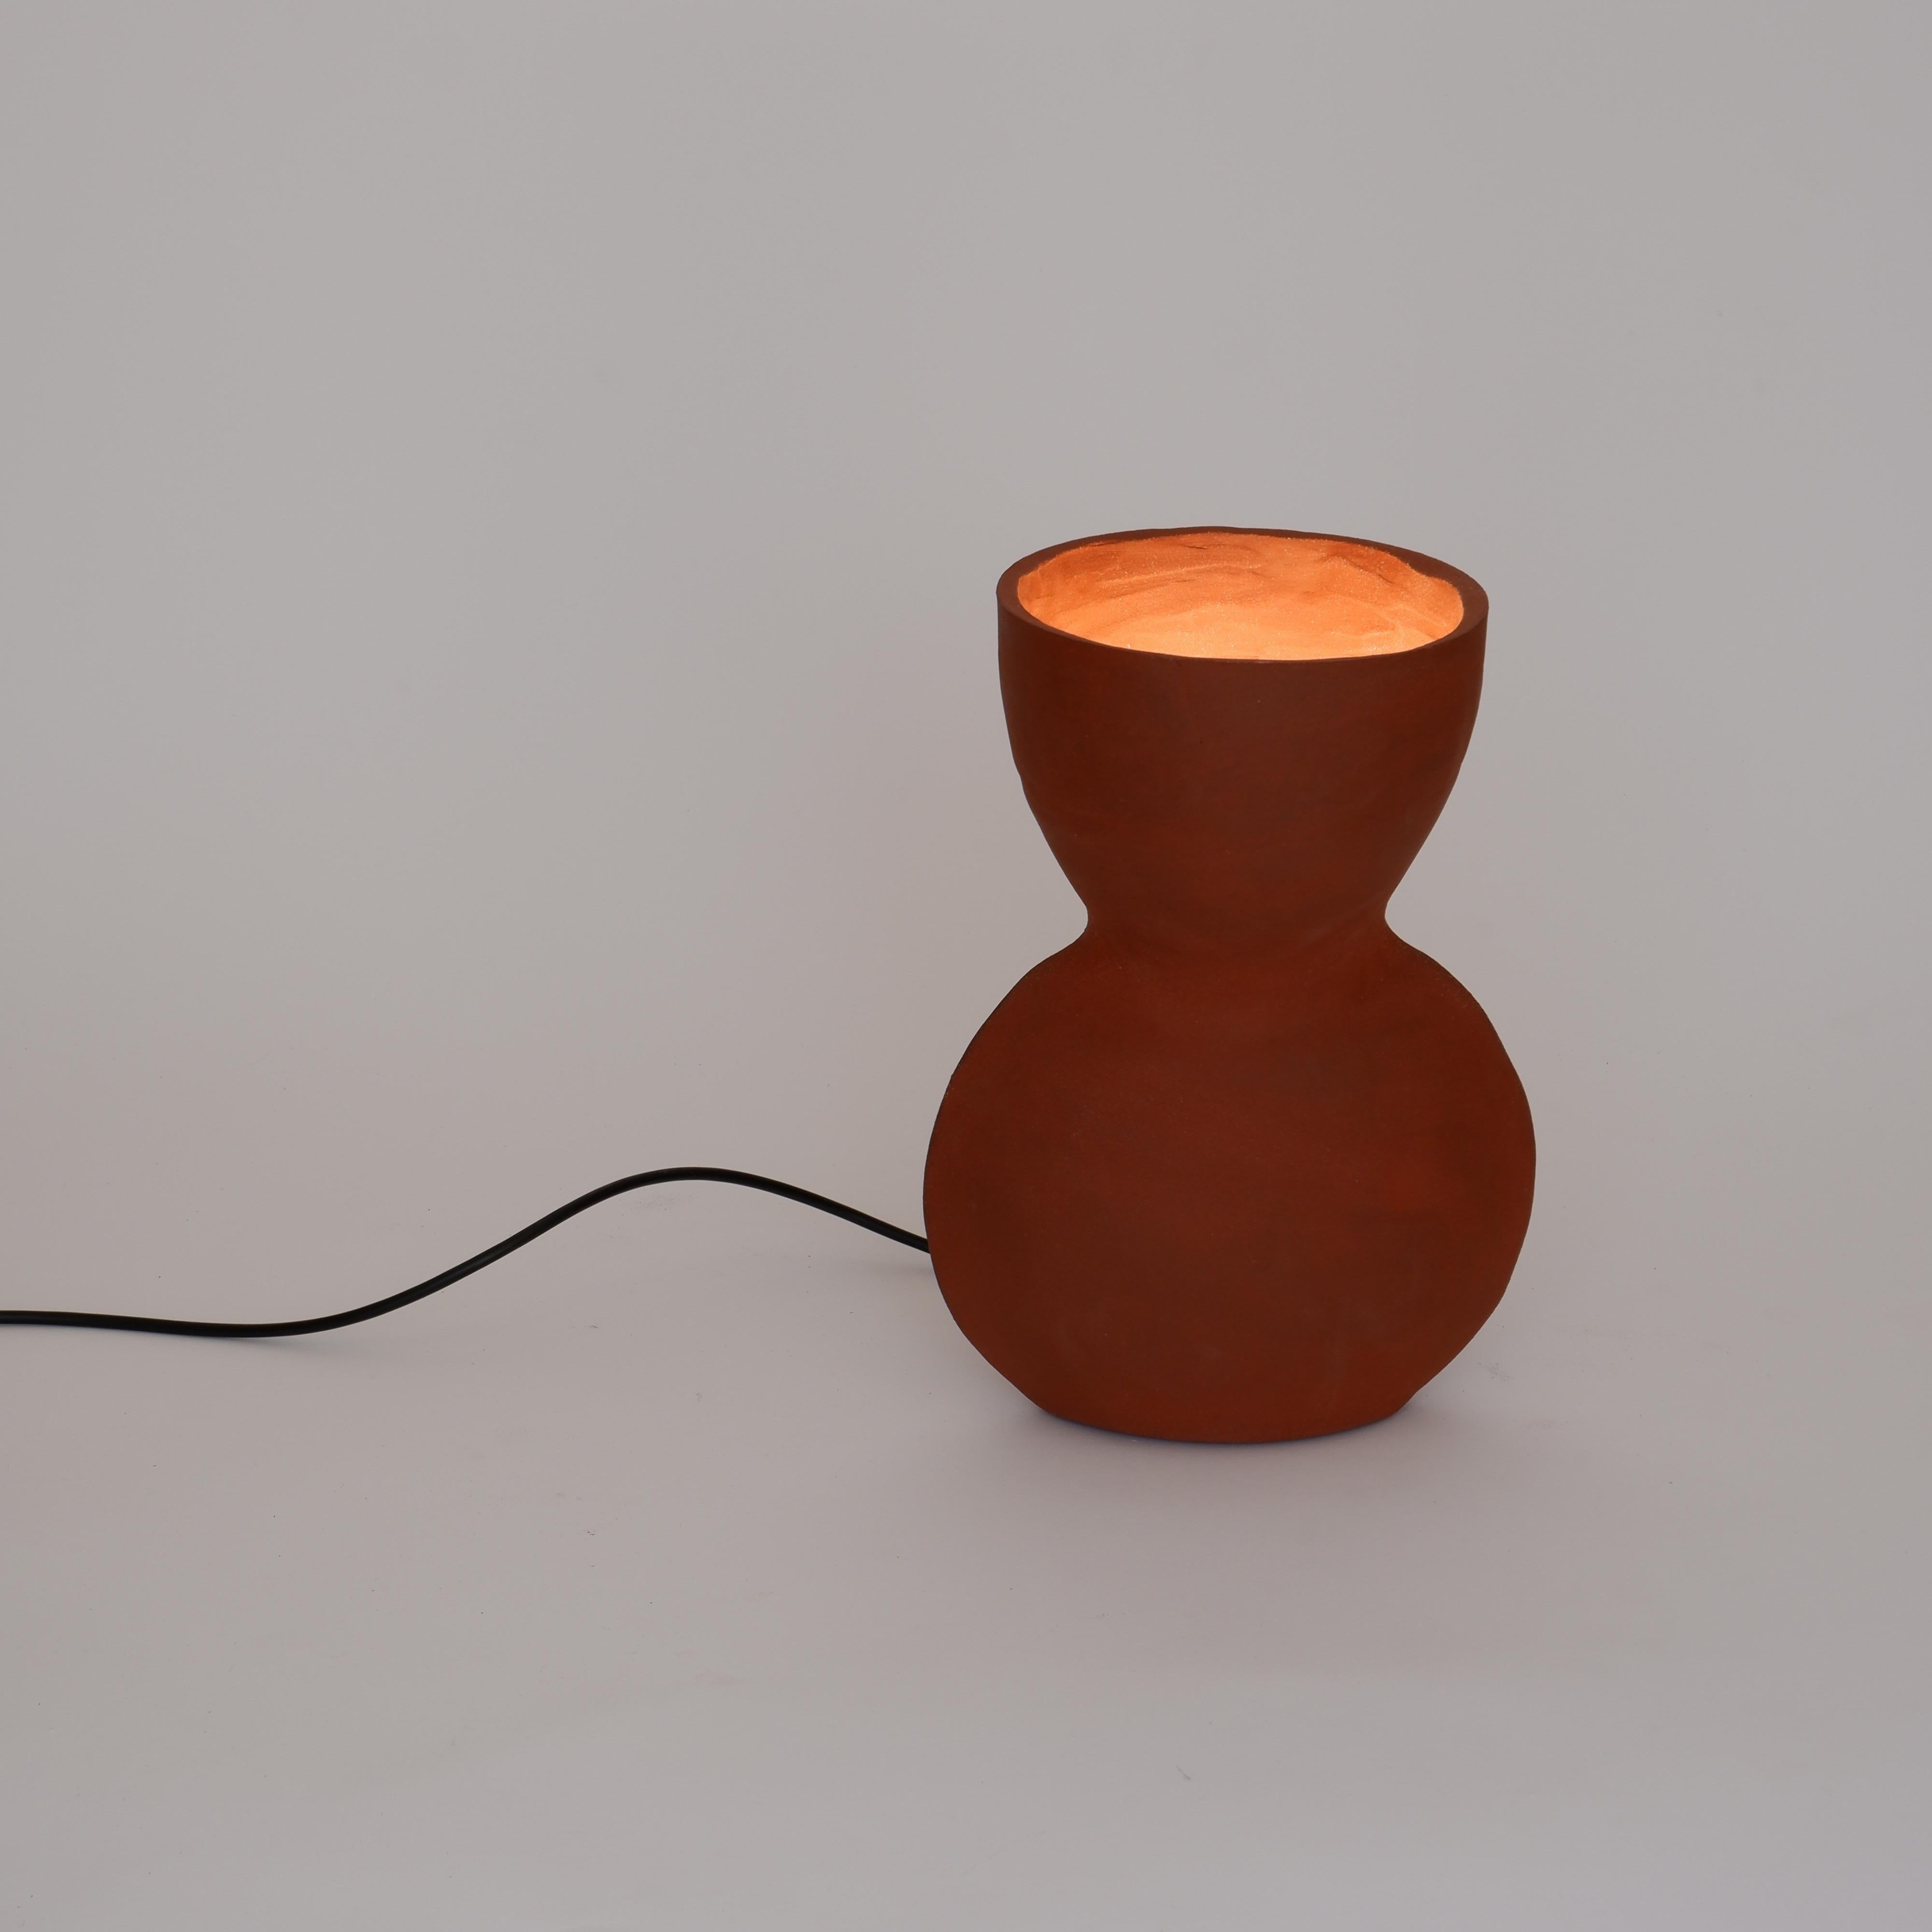 Unira Big Red Lamp by Ia Kutateladze
One Of A Kind.
Dimensions: D 17 x W 23 x H 32 cm.
Materials: Clay.

Each piece is one of a kind, due to its free hand-building process. Different color variations available: raw black clay, raw white clay and raw